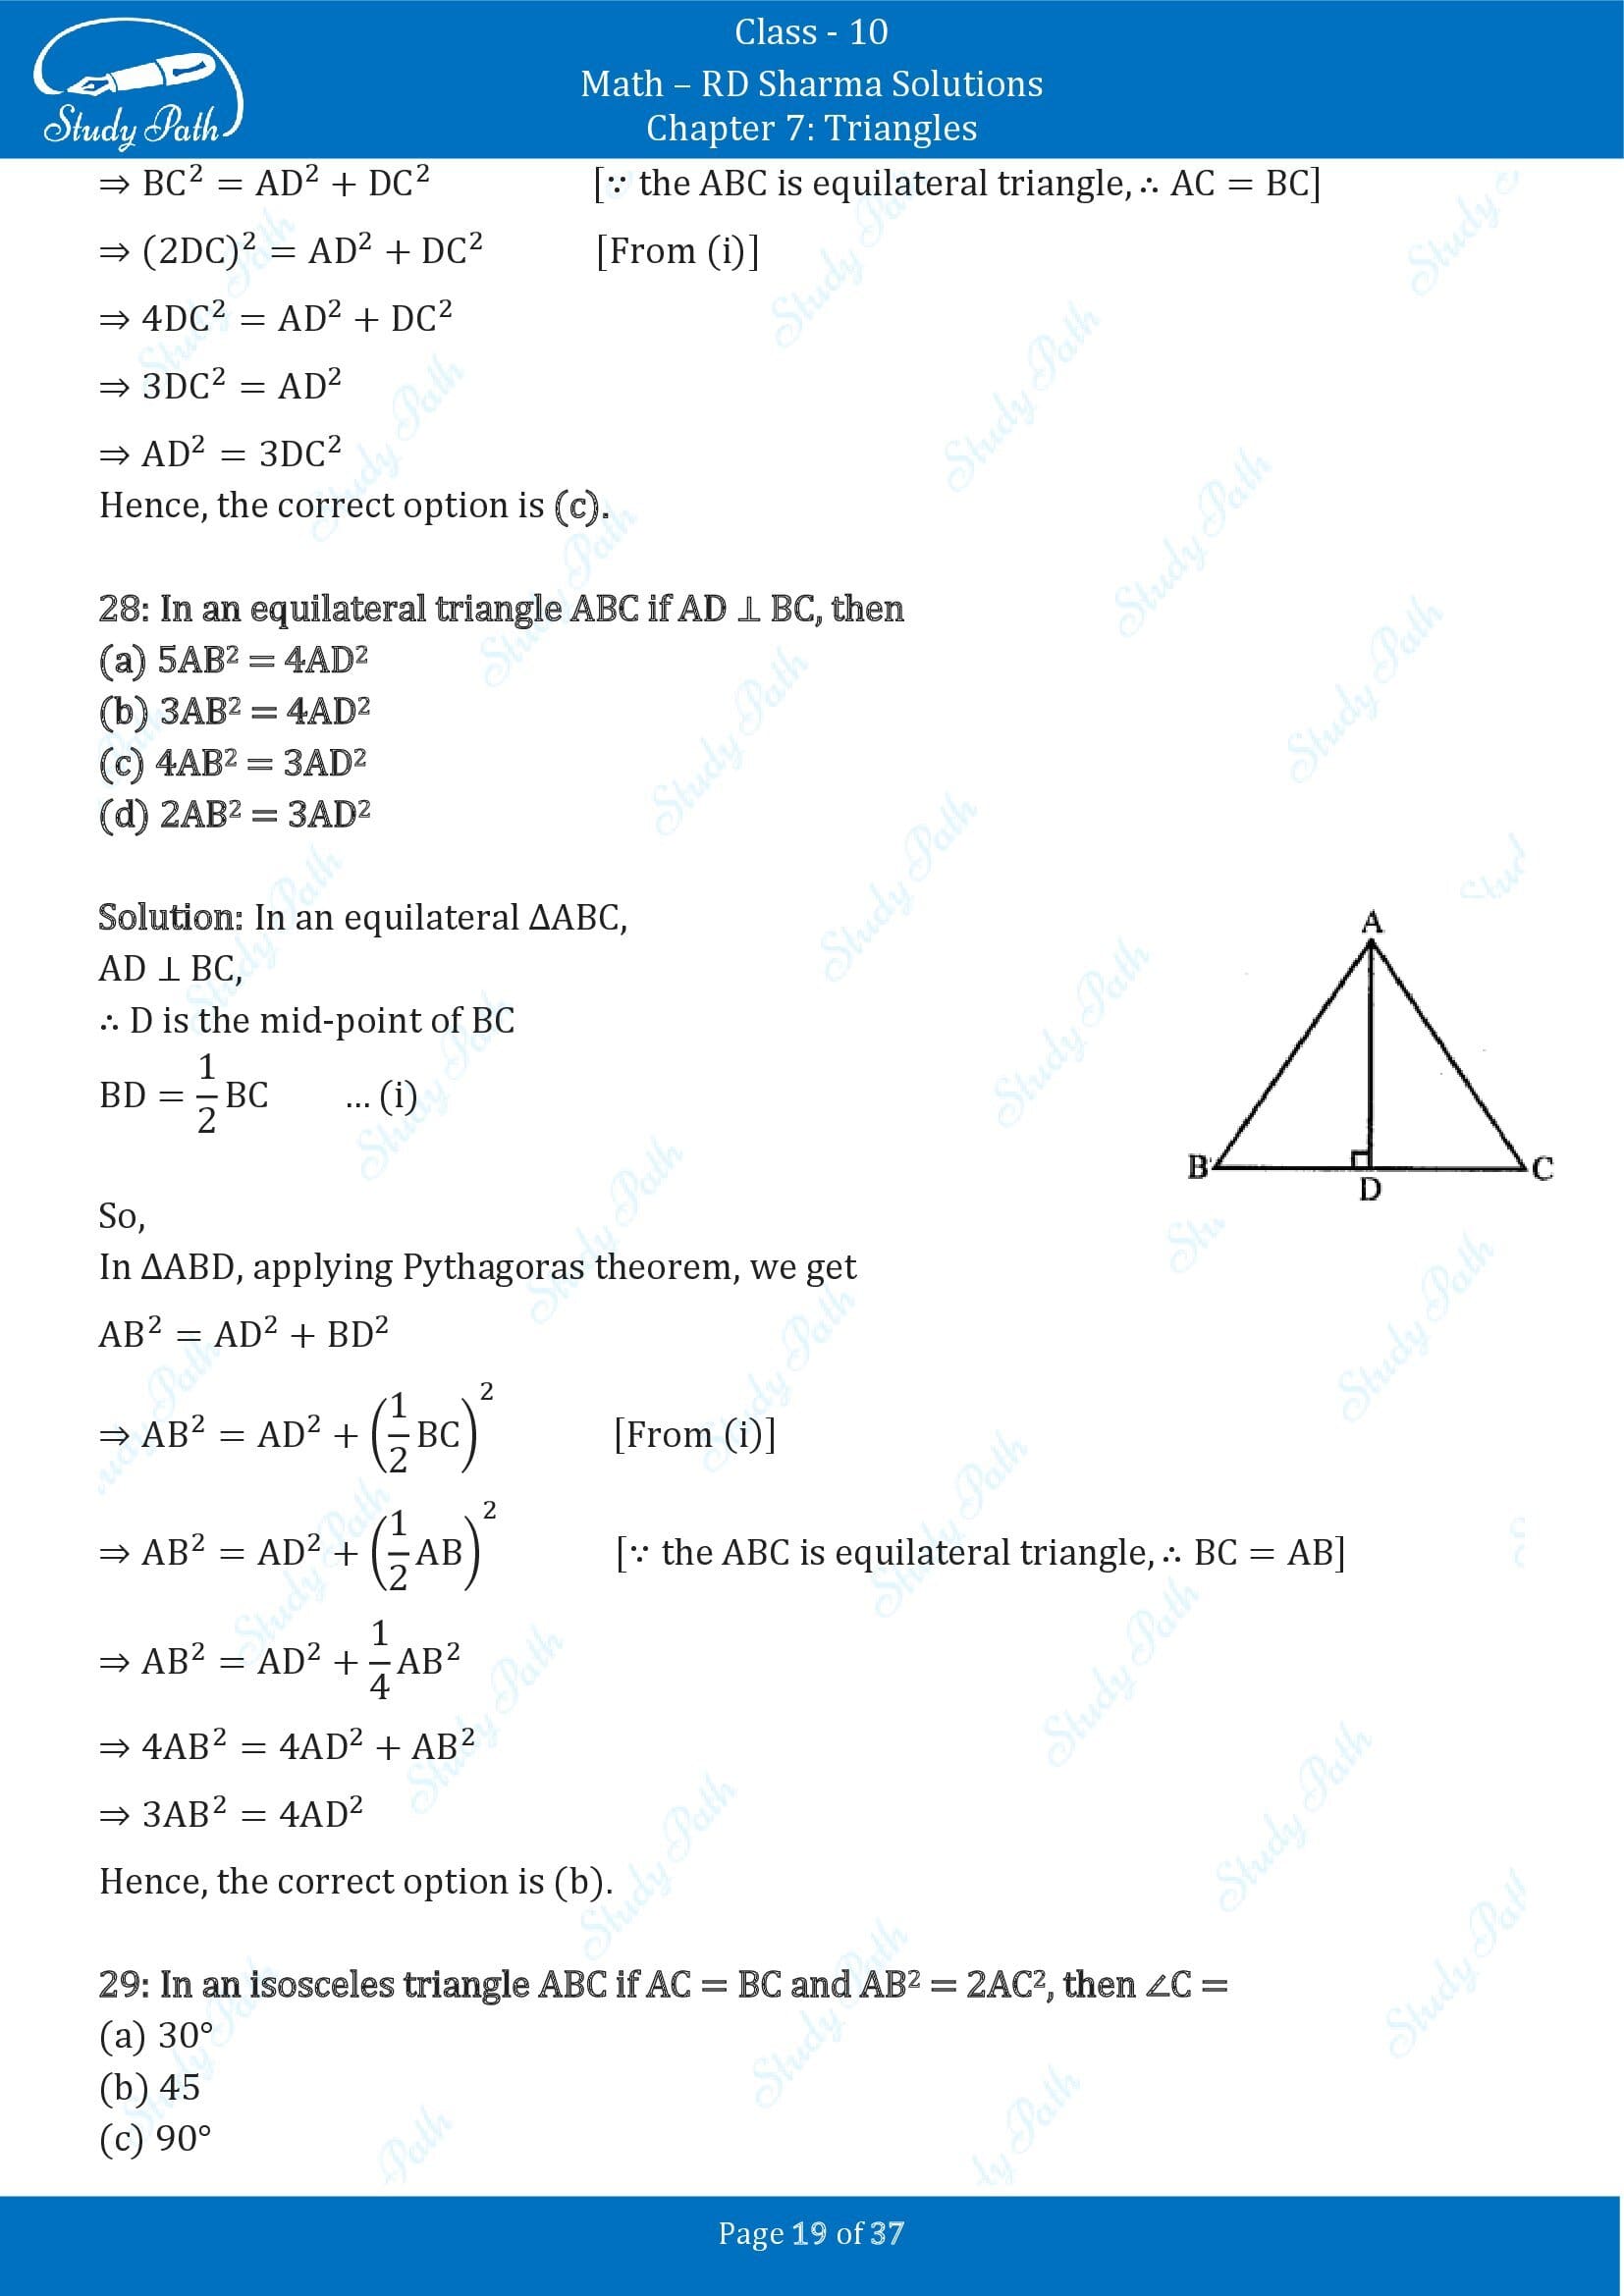 RD Sharma Solutions Class 10 Chapter 7 Triangles Multiple Choice Question MCQs 00019